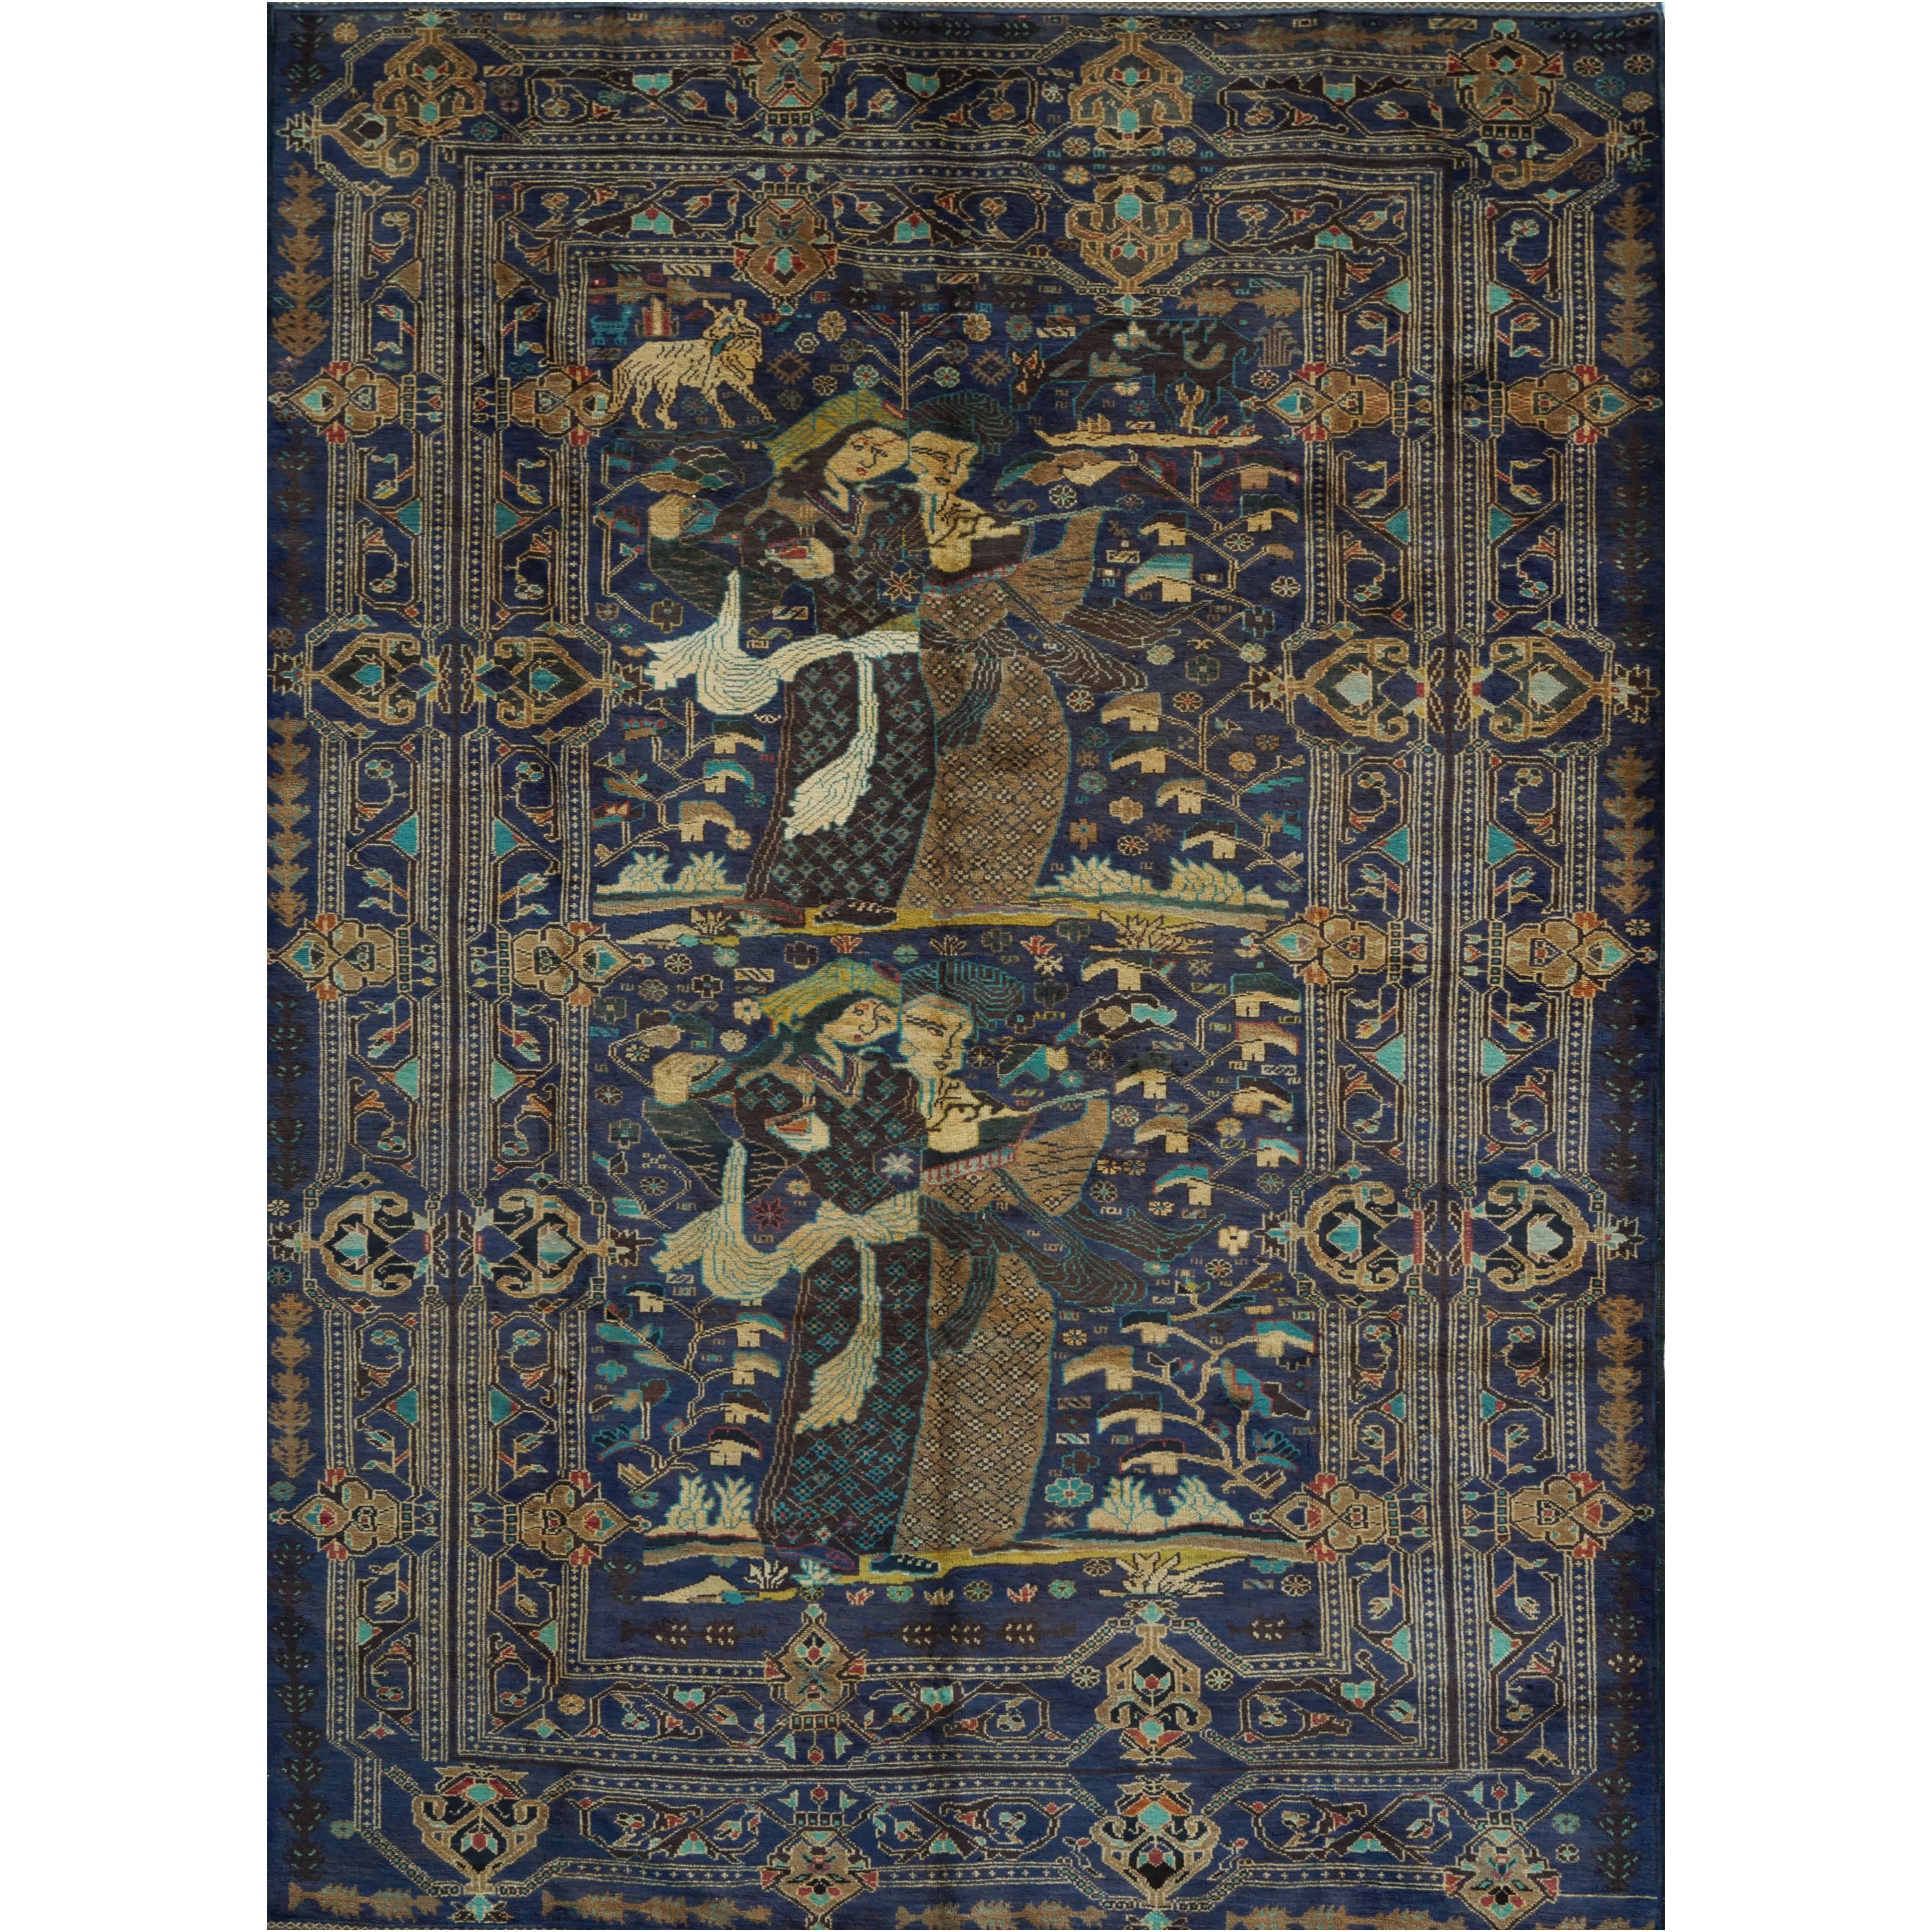 Afghan Pictorial Carpet For Sale